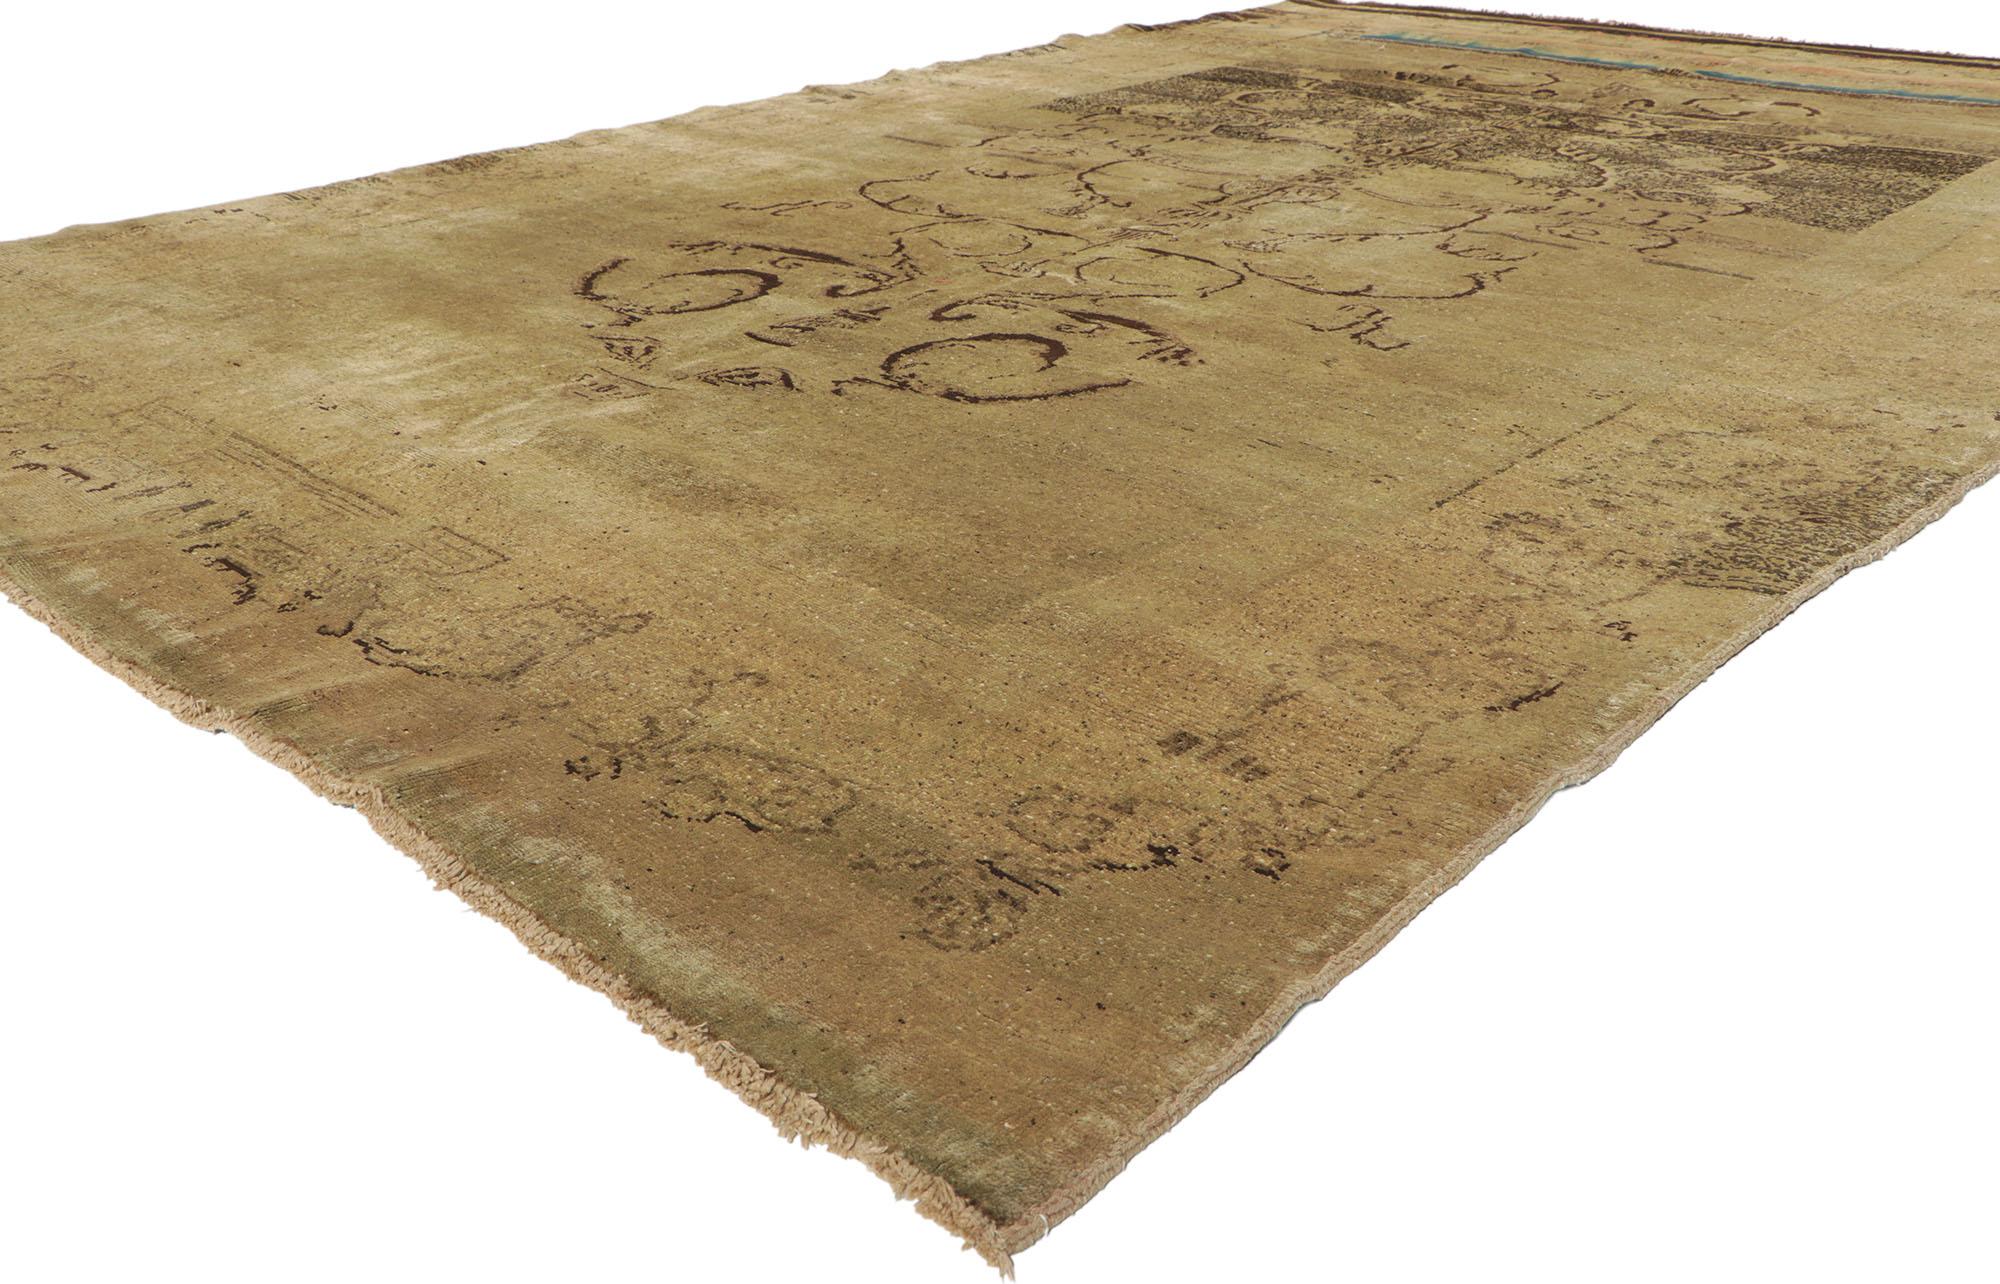 51454 Vintage Turkish Oushak Rug, 07'00 x 11'03. 
Rustic sensibility meets beguiling charm in this hand knotted wool vintage Turkish Oushak rug. The faded botanical design and earthy colors woven into this piece work together resulting in a cozy and